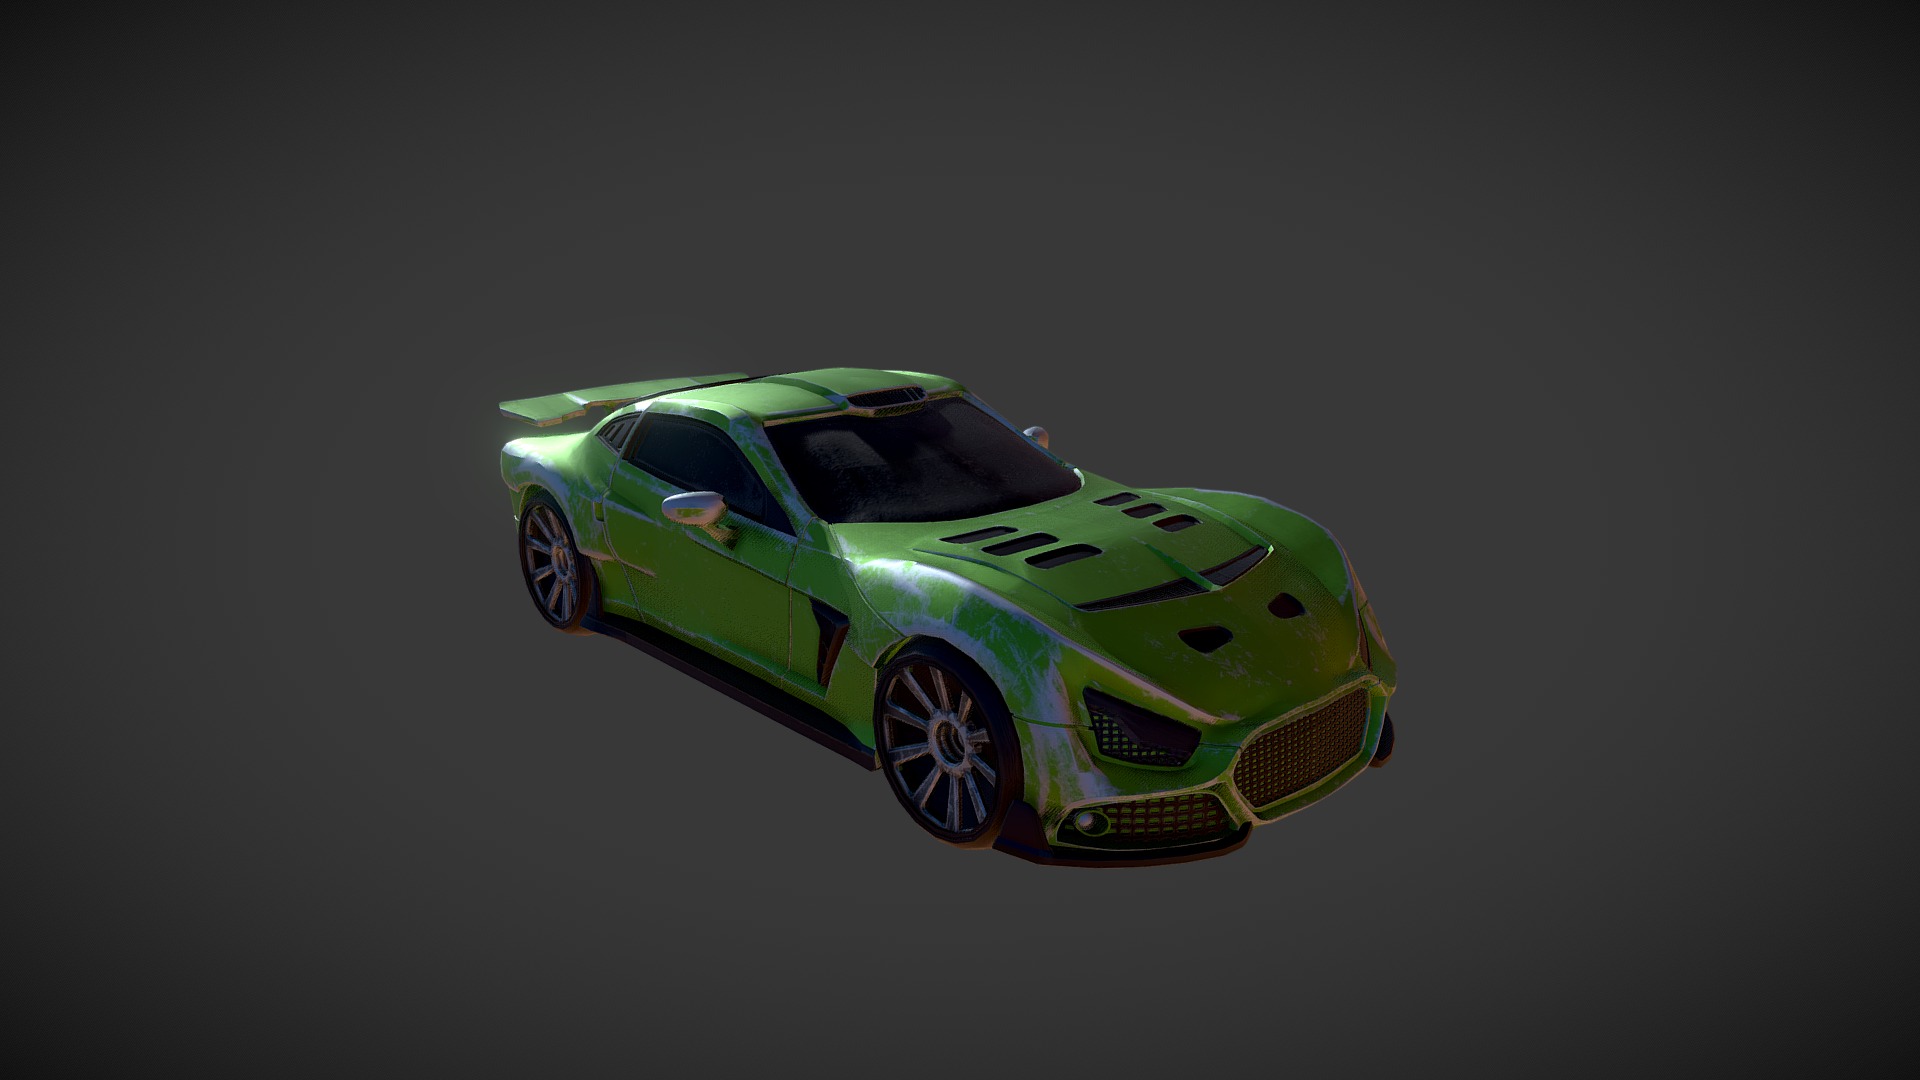 3D model Flanker - This is a 3D model of the Flanker. The 3D model is about a green and white car.